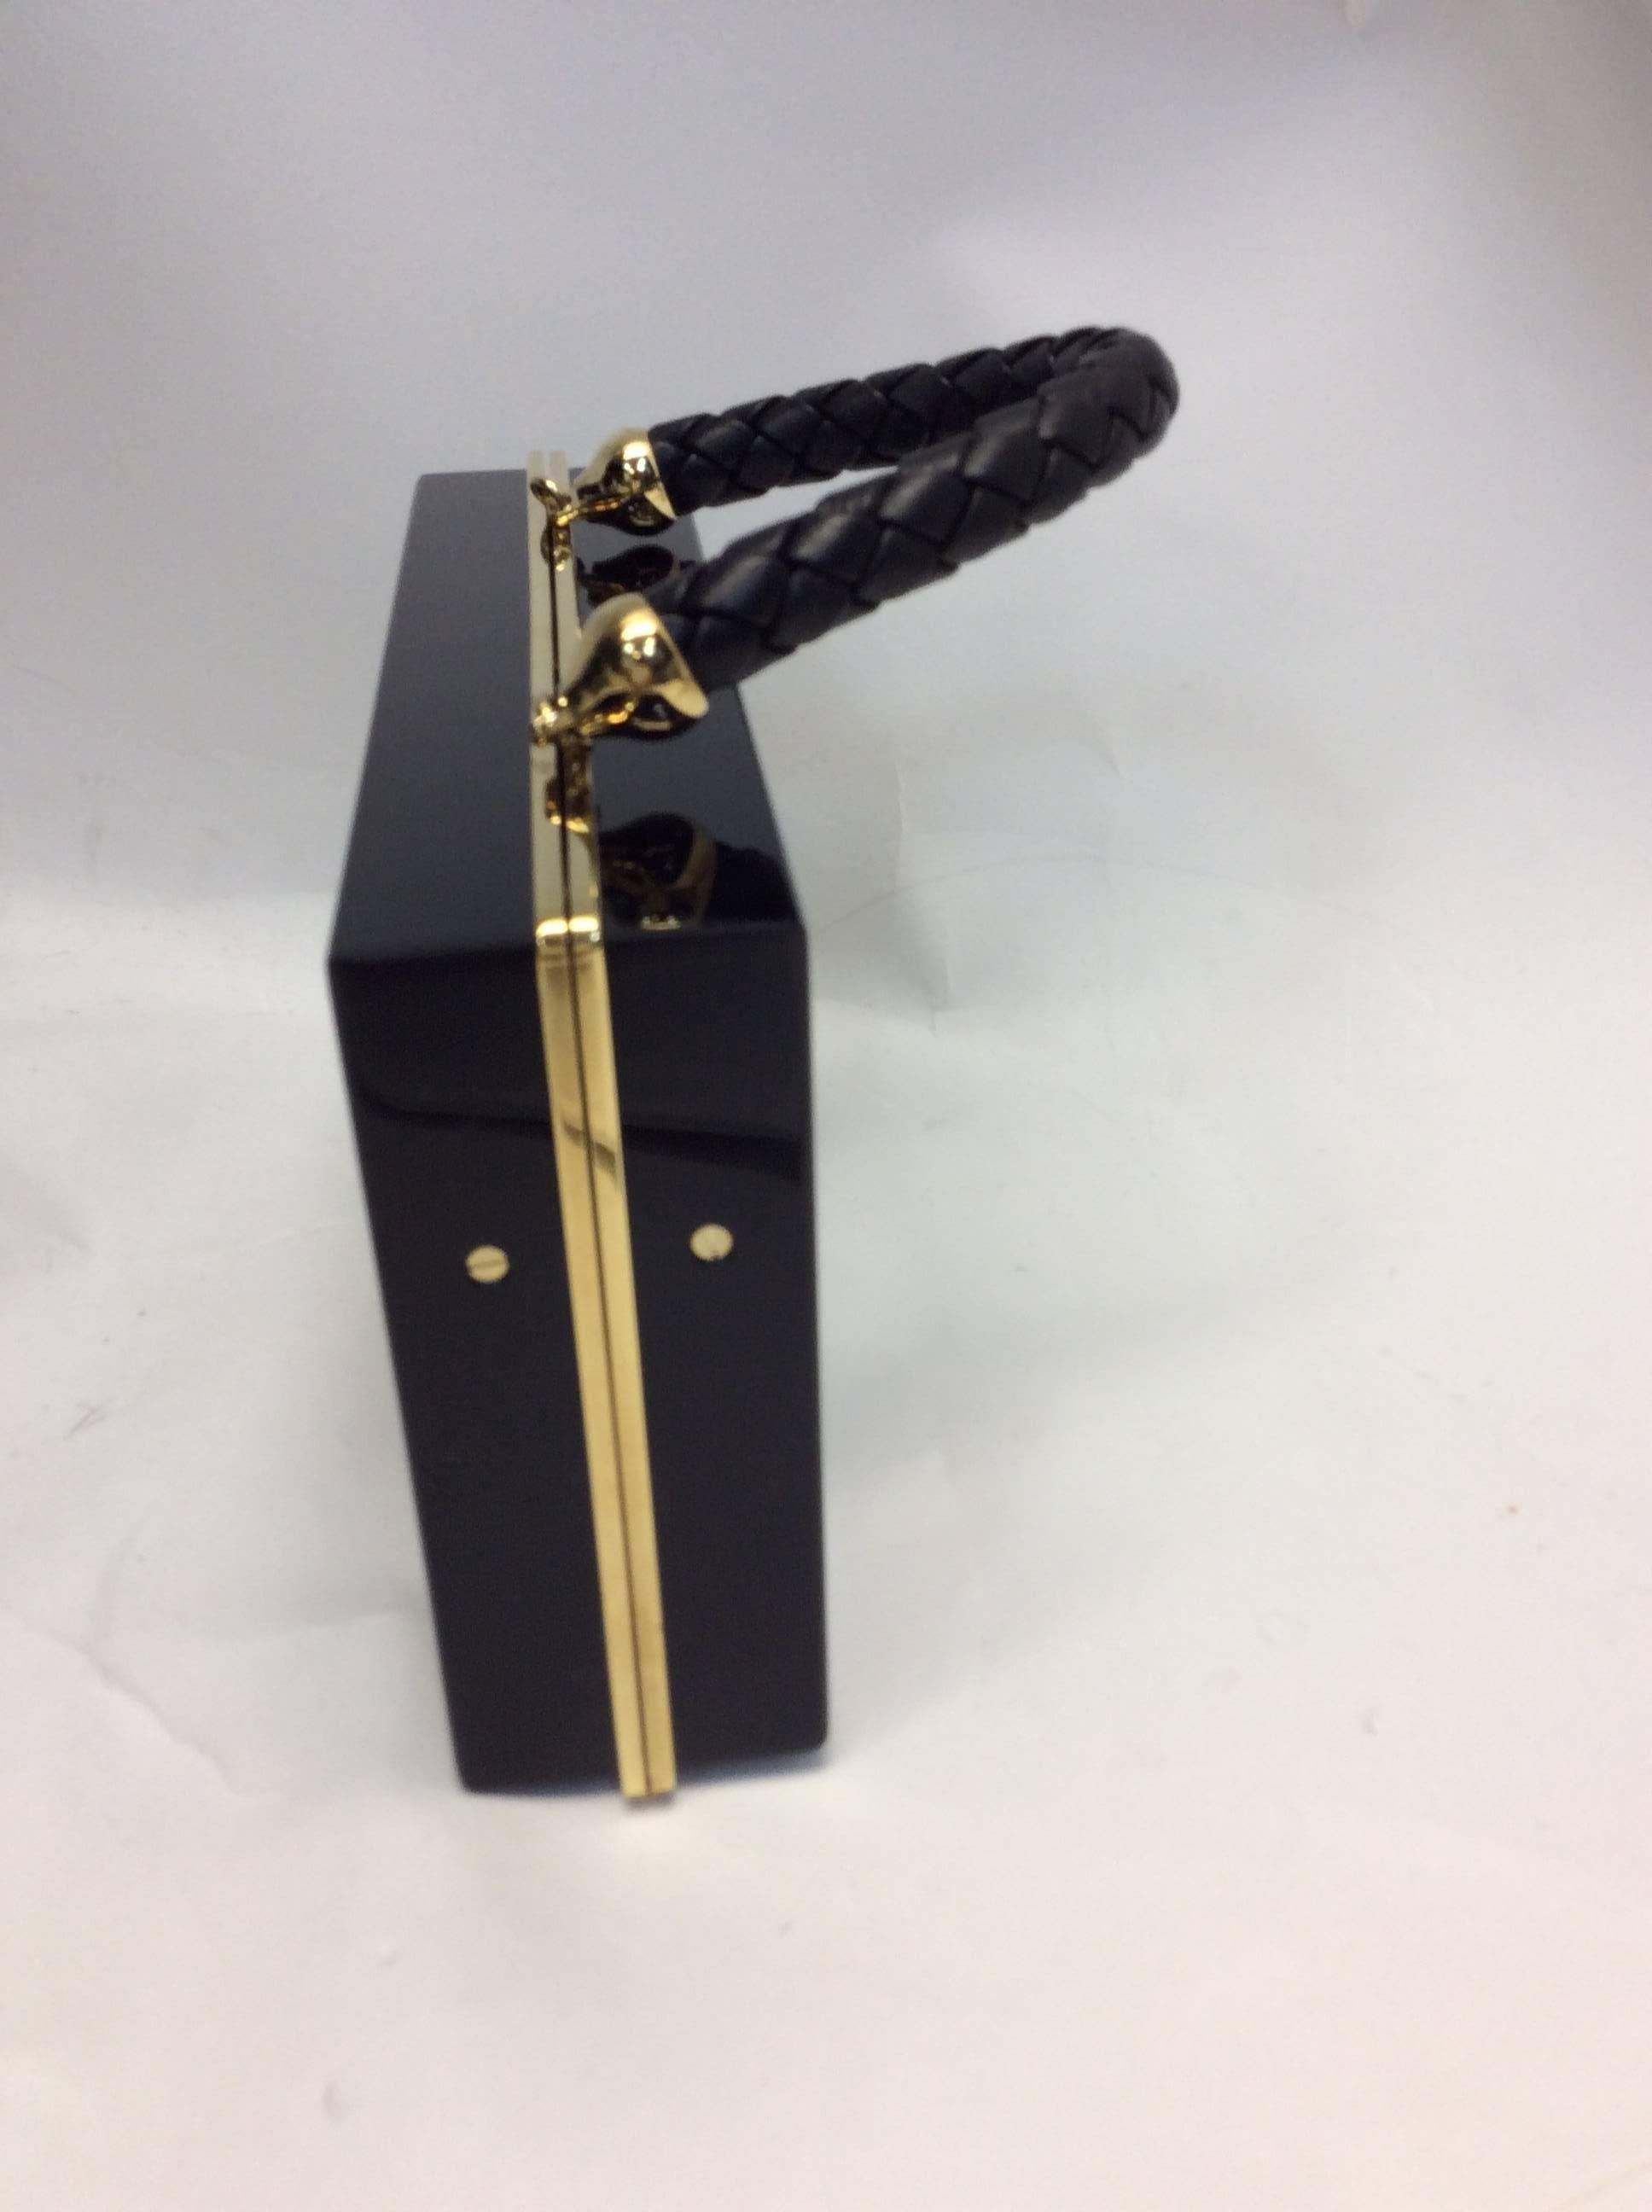 Charlotte Olympia Black Acrylic Box Clutch
Leather top handle 
Gold toned trim 
Key hole design on front 
Made in Italy
$399